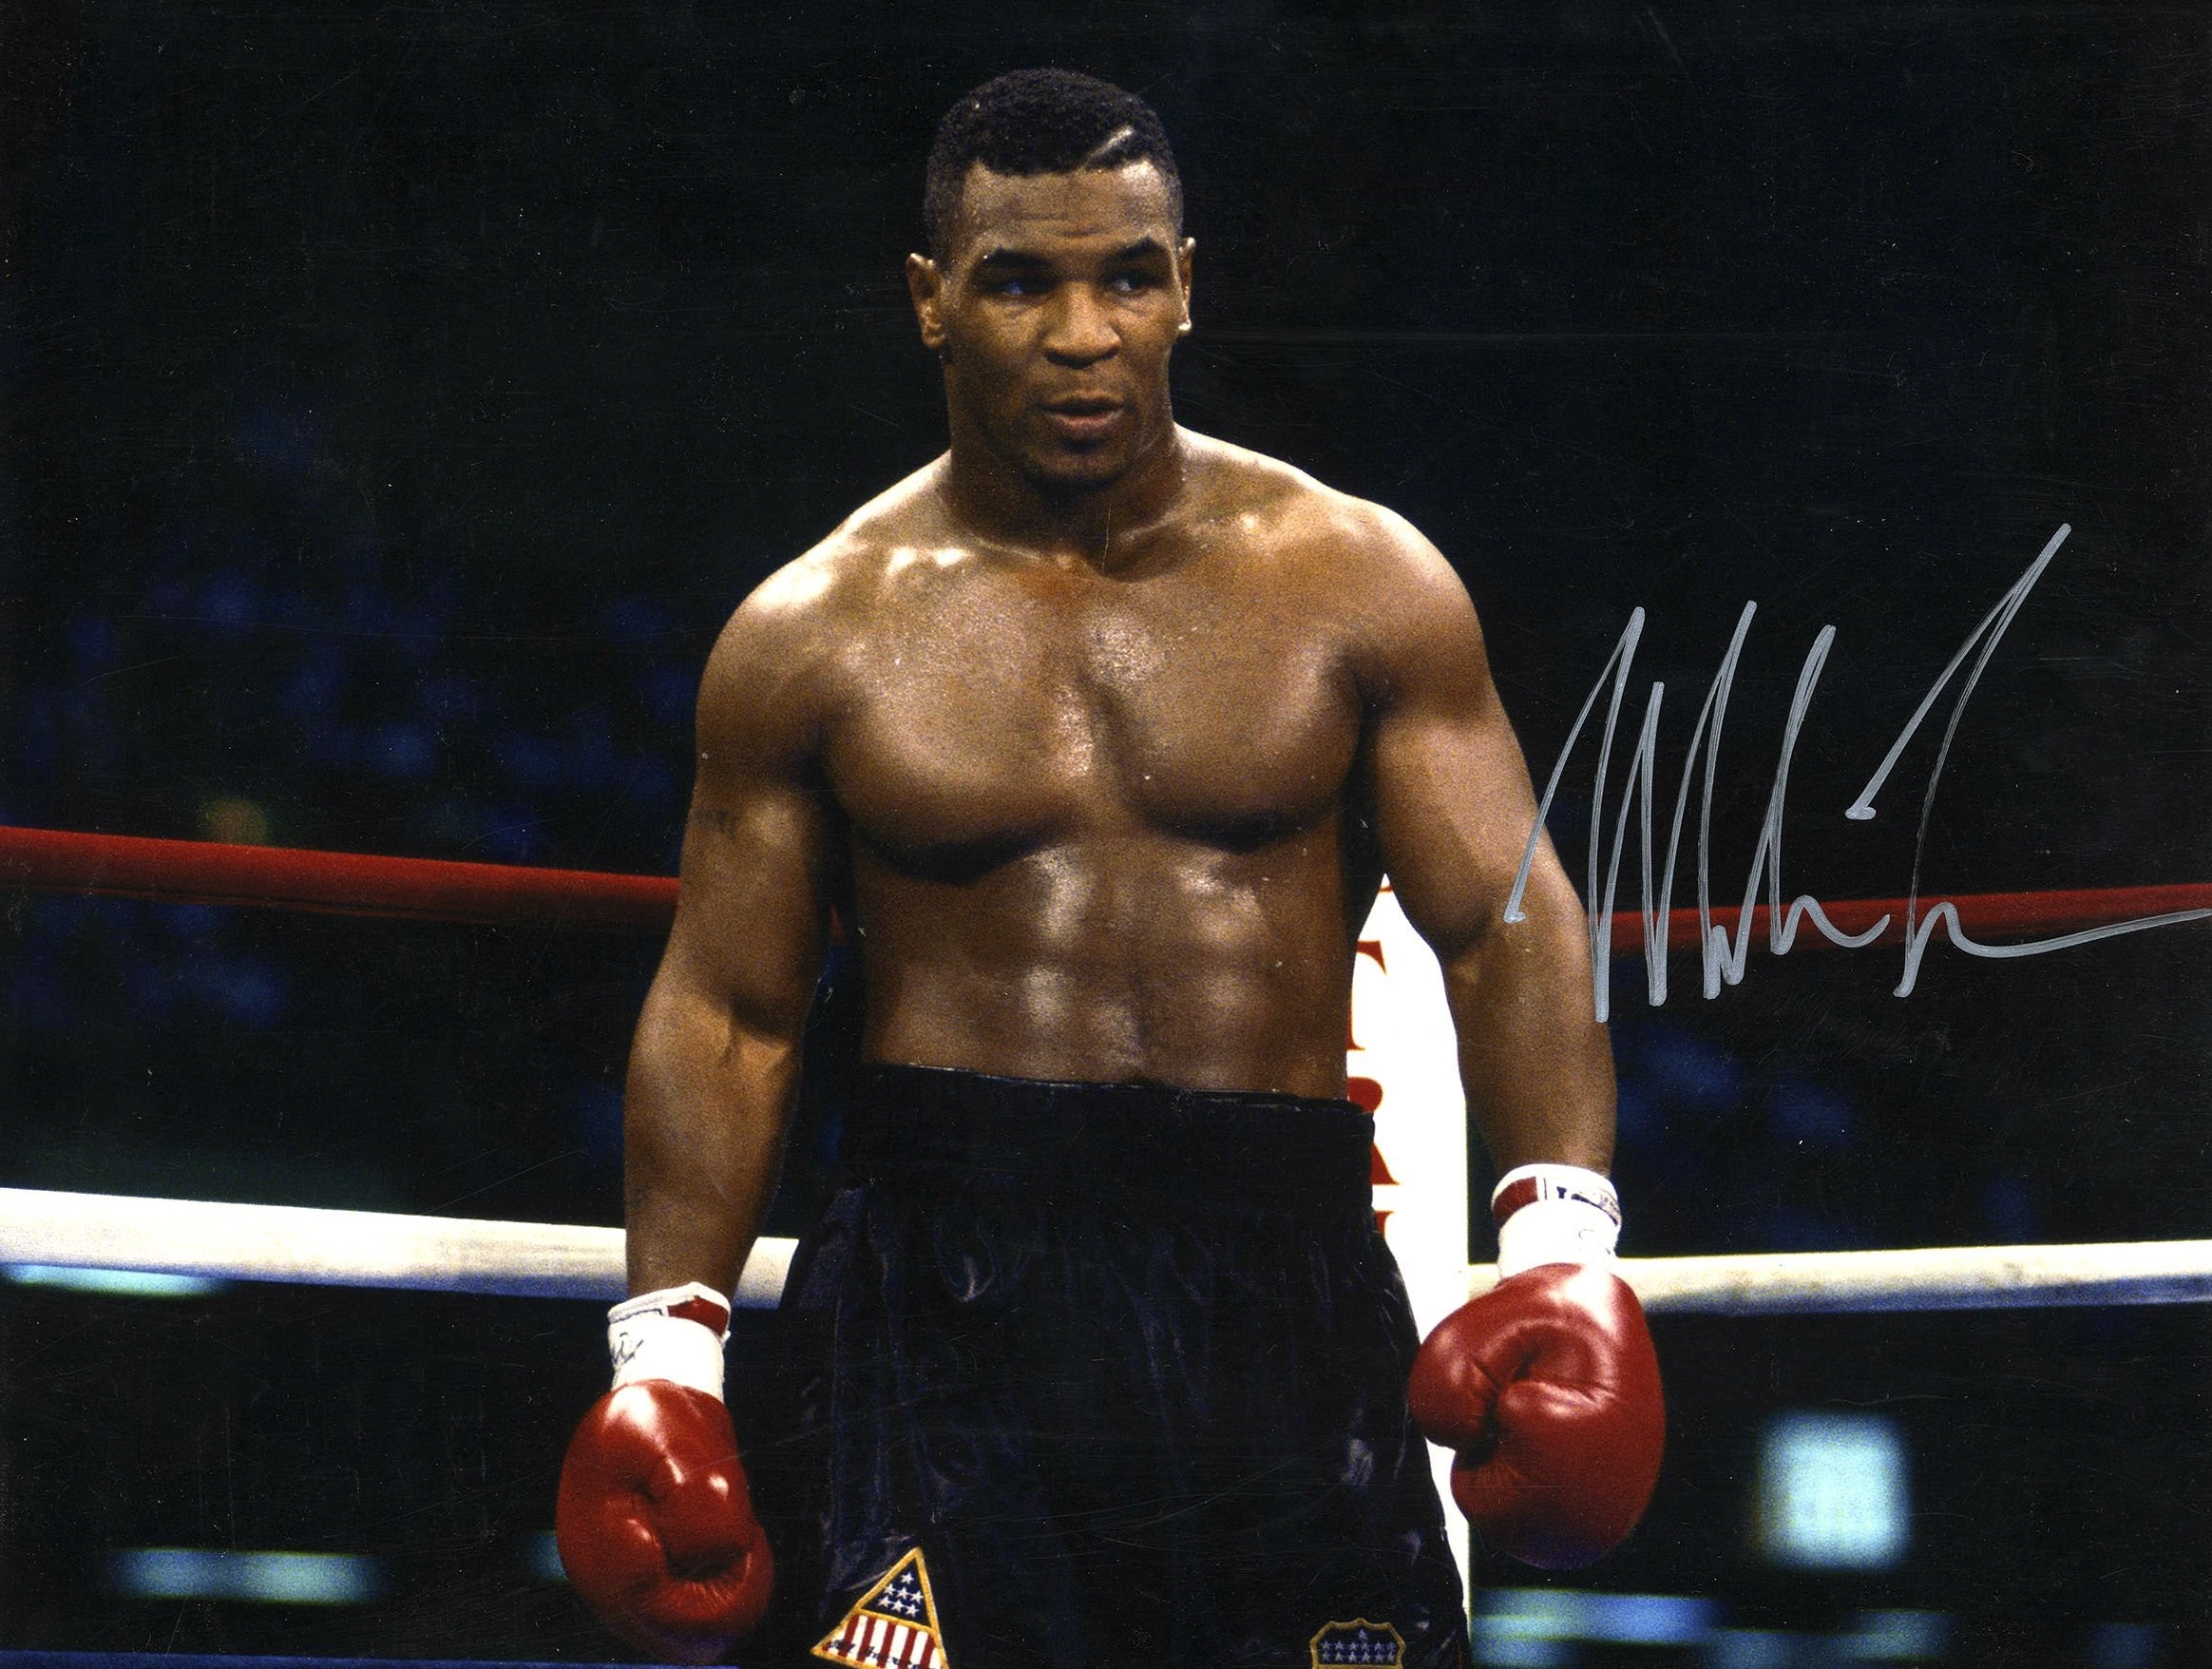 mike tyson wallpaper,barechested,professional boxer,sport venue,professional boxing,muscle